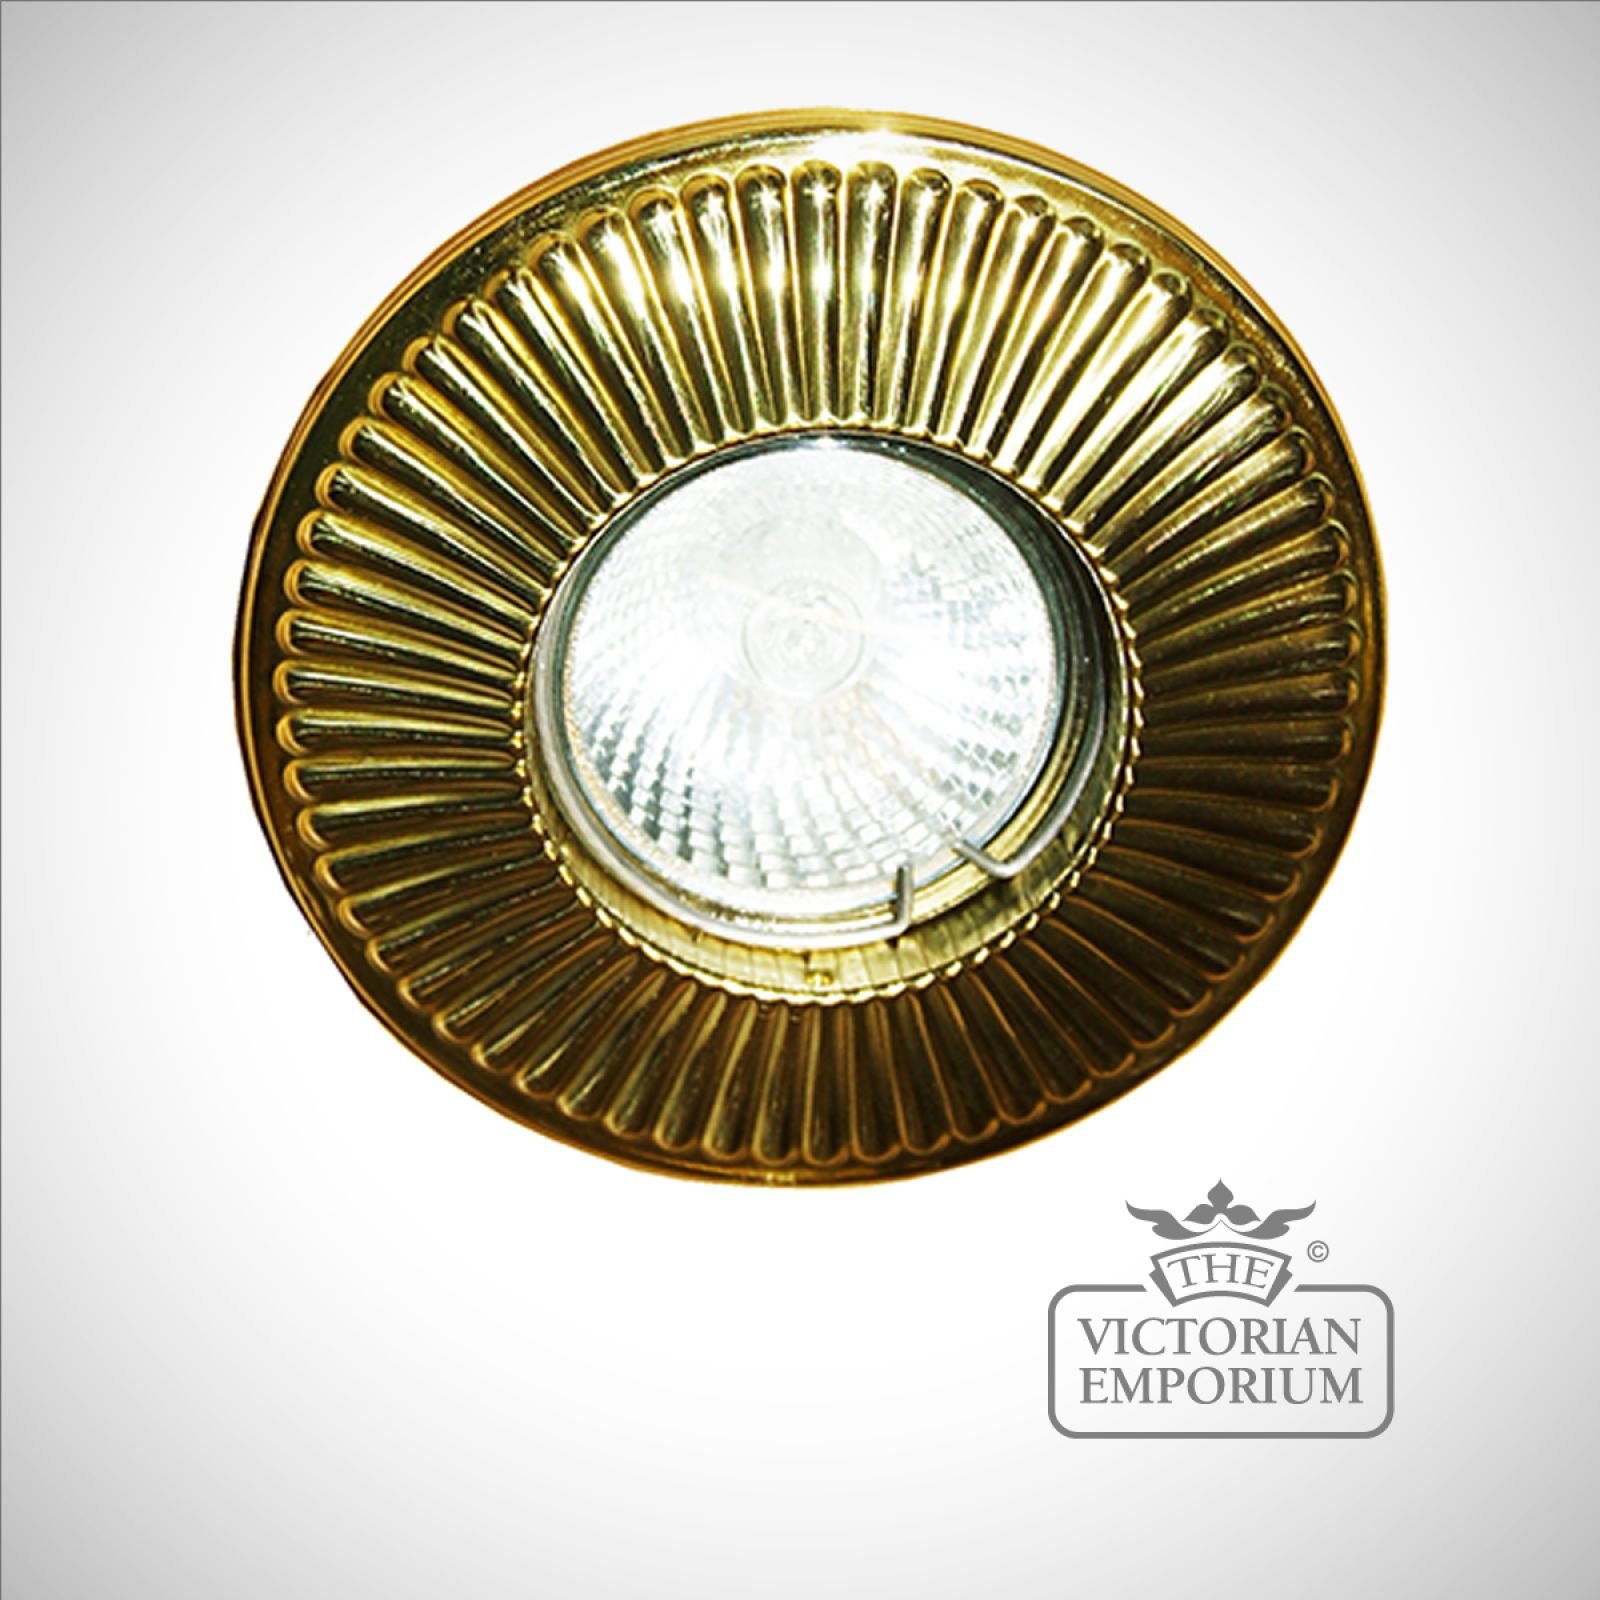 Penn decorative fluted recessed spot light in a choice of finishes